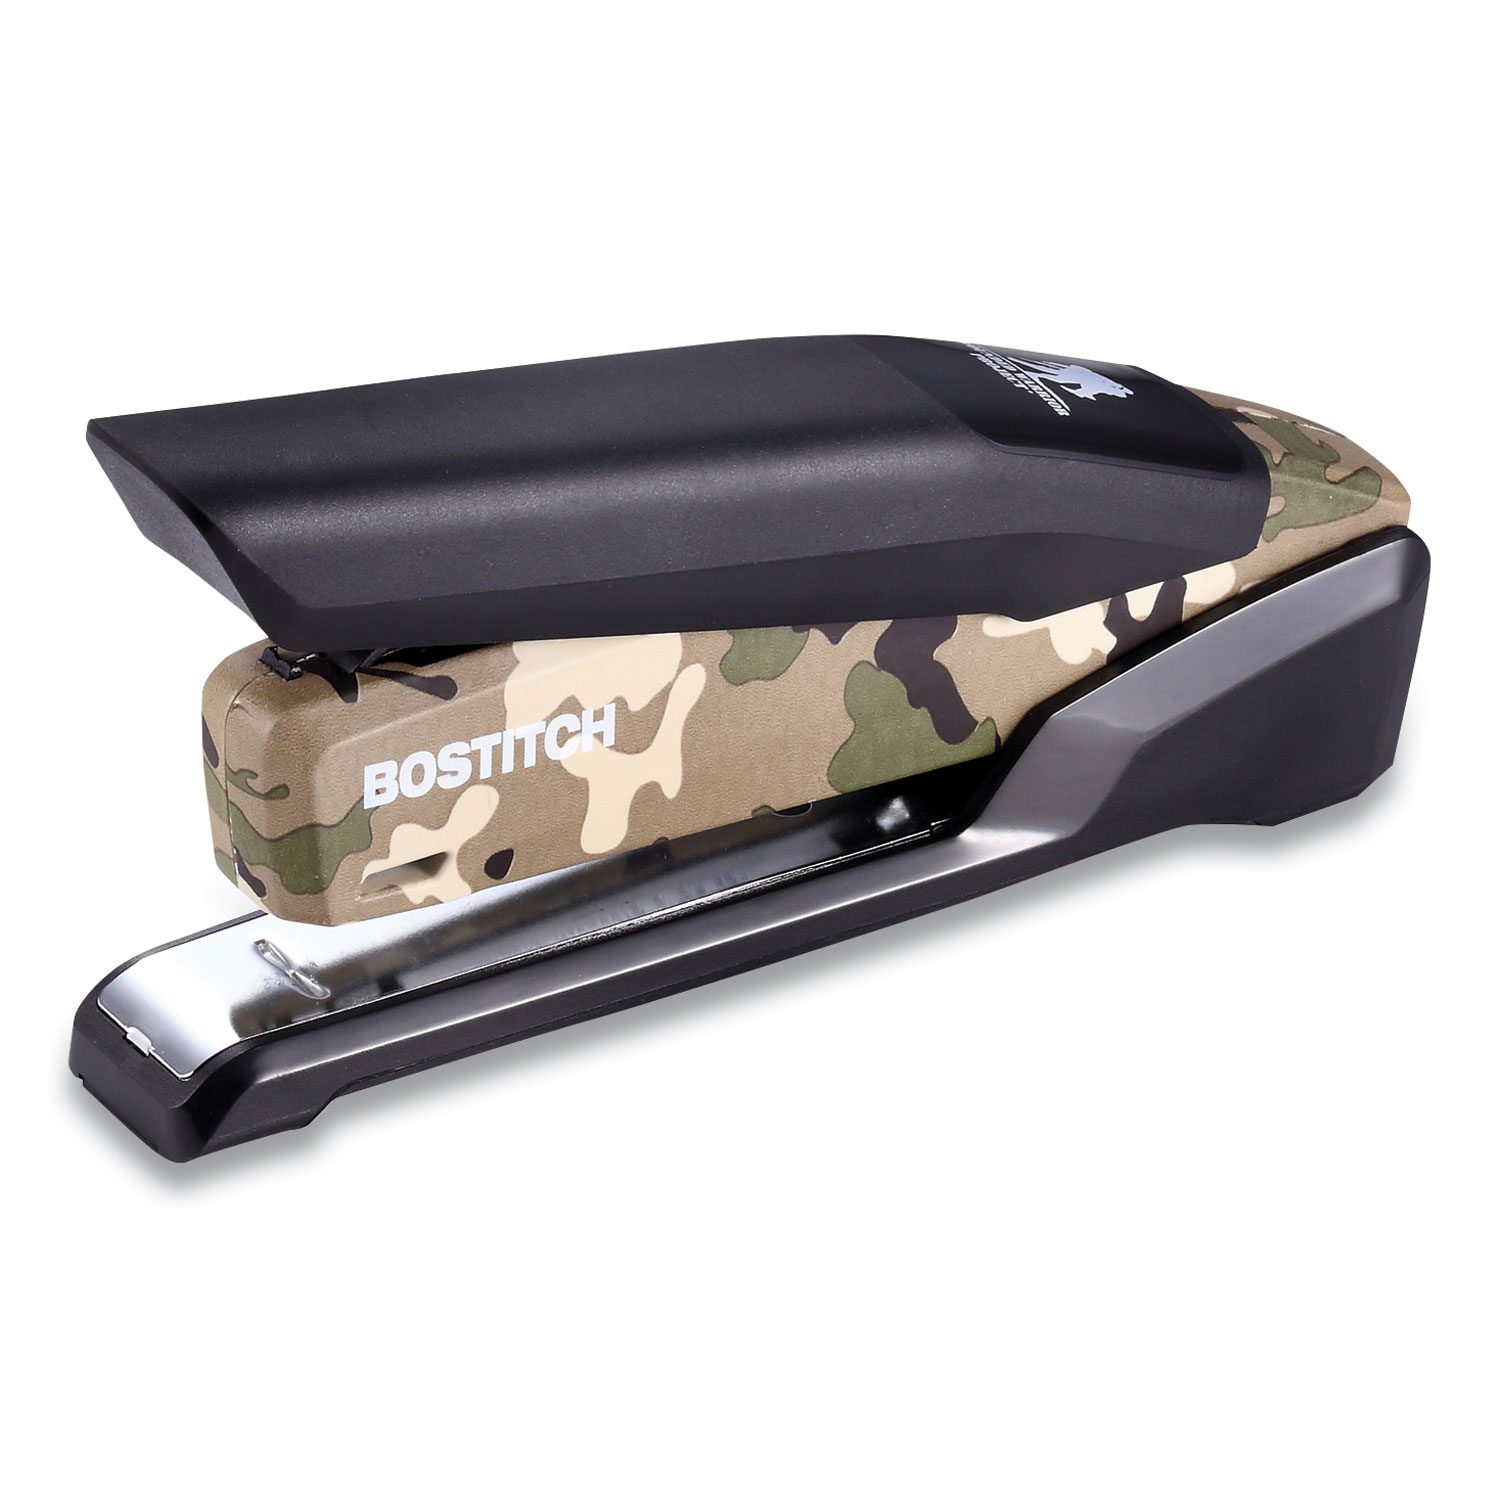  Bostitch INP28-WW Wounded Warrior Project Desktop Stapler, 28-Sheet Capacity, Black/Camouflage (BOS24343466) 